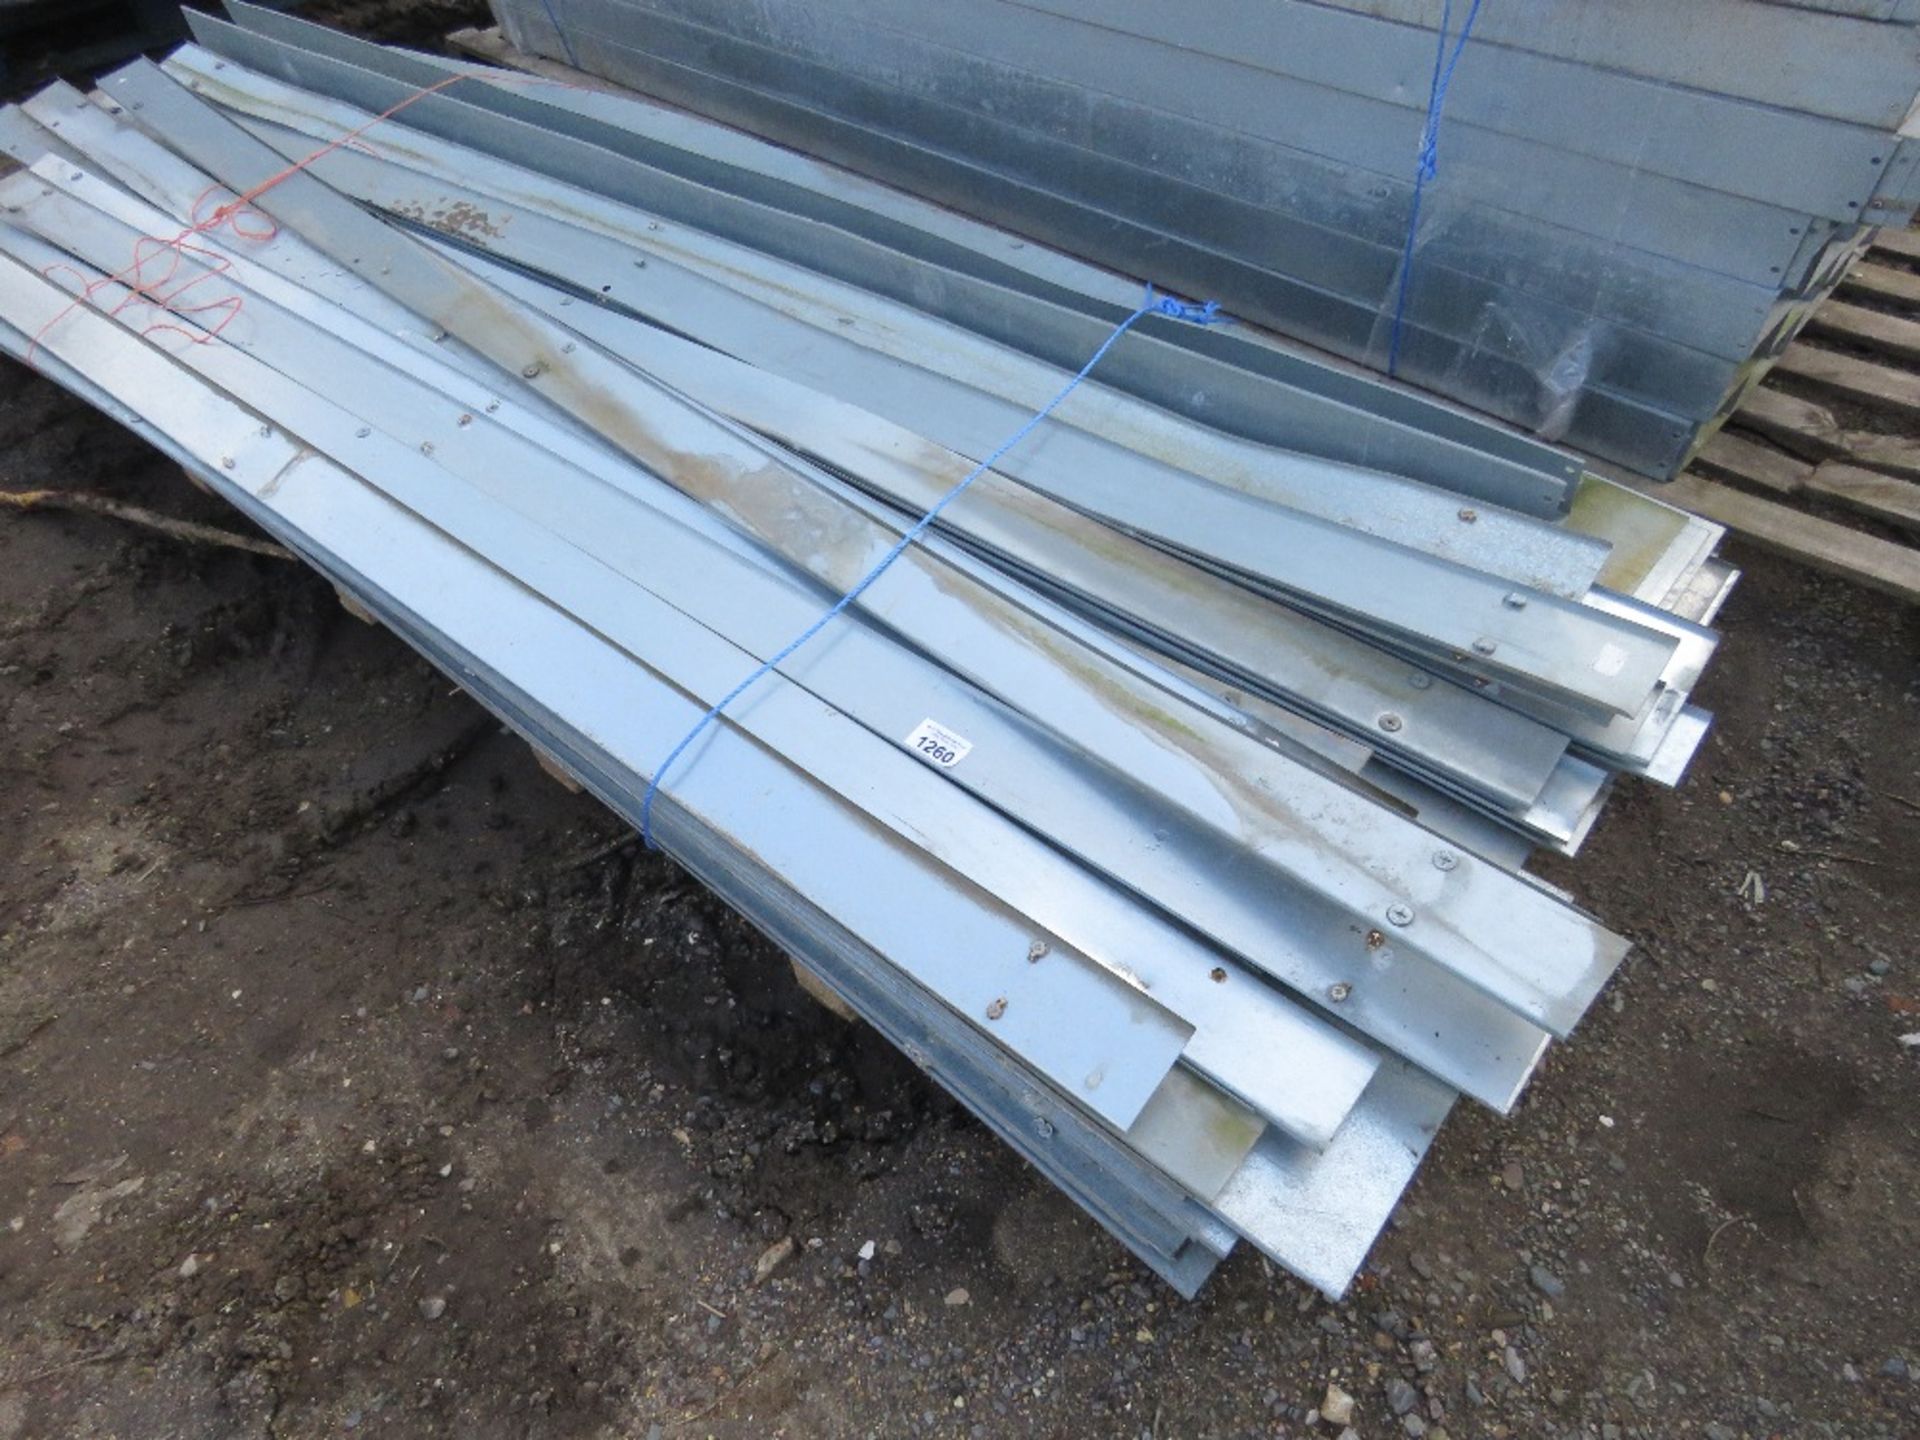 LARGE QUANTITY OF METAL DUCTING PARTS INCLUDING DUCTS AT 9FT LENGTH APPROX. SOURCED FROM COMPANY LIQ - Image 2 of 9